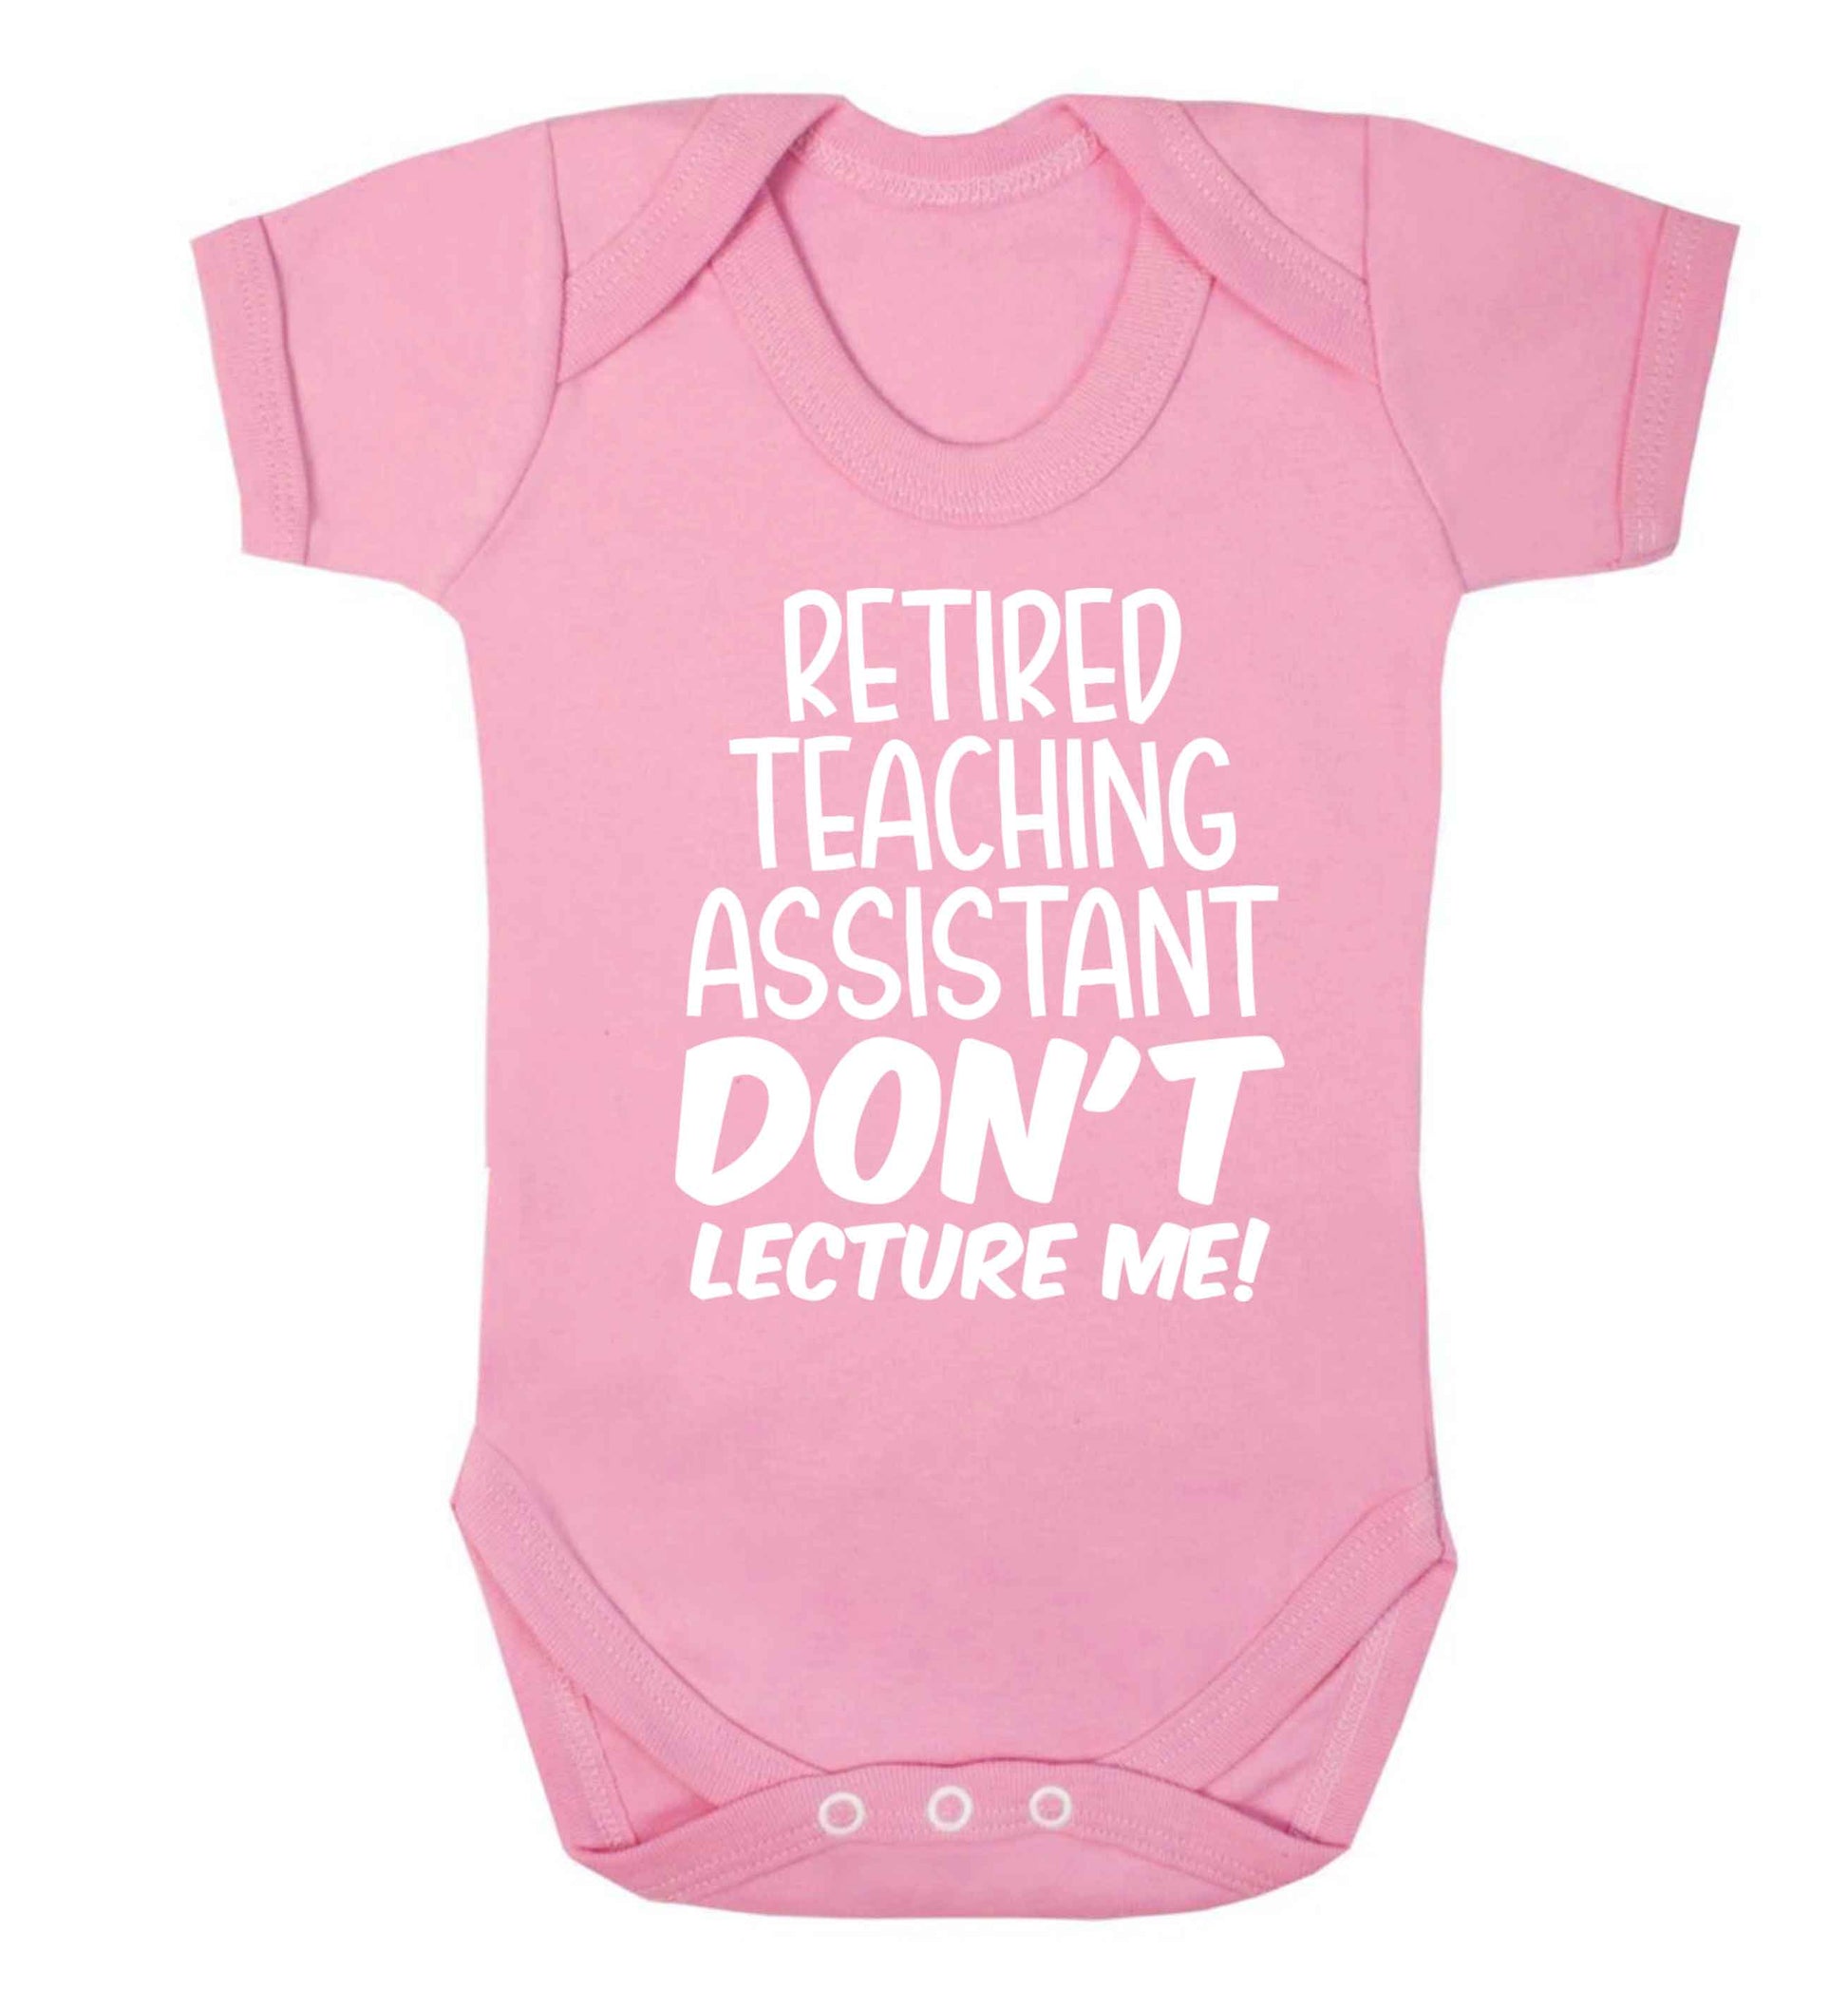 Retired teaching assistant don't lecture me Baby Vest pale pink 18-24 months